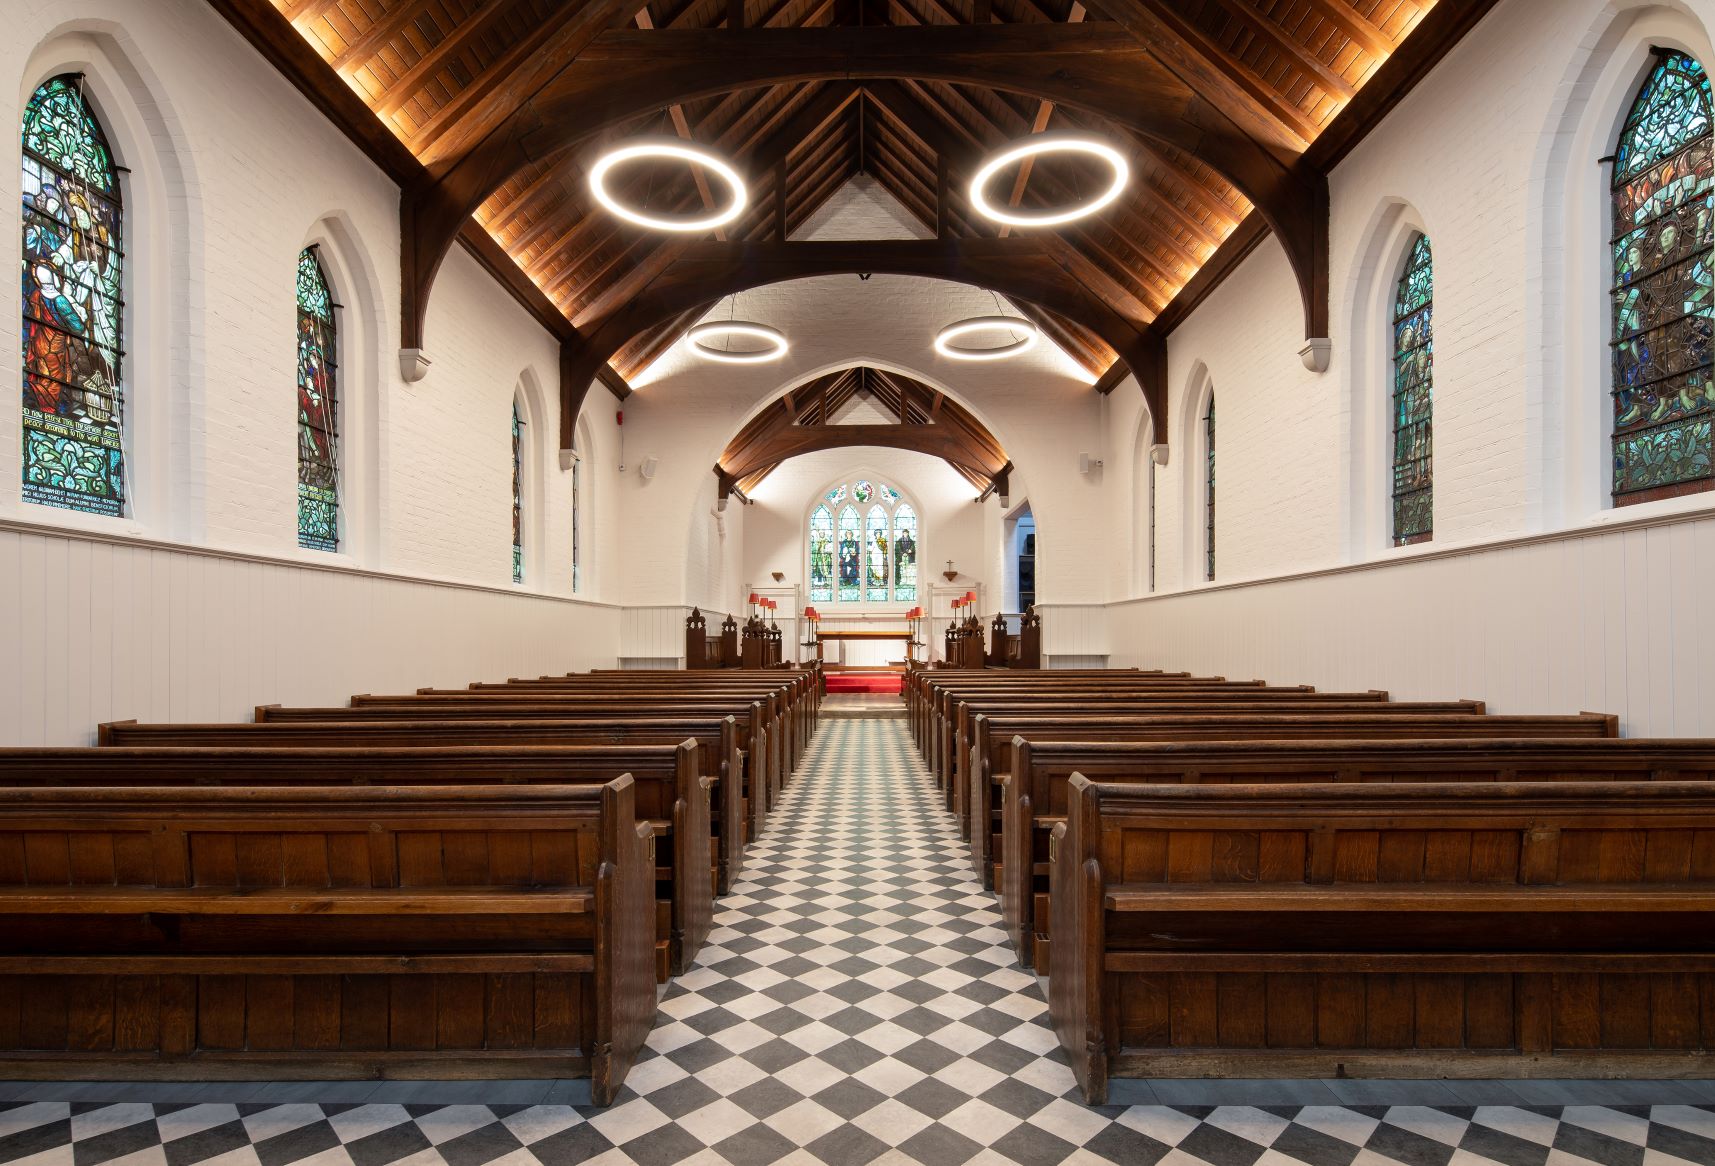 View looking down the nave of a chapel to the altar